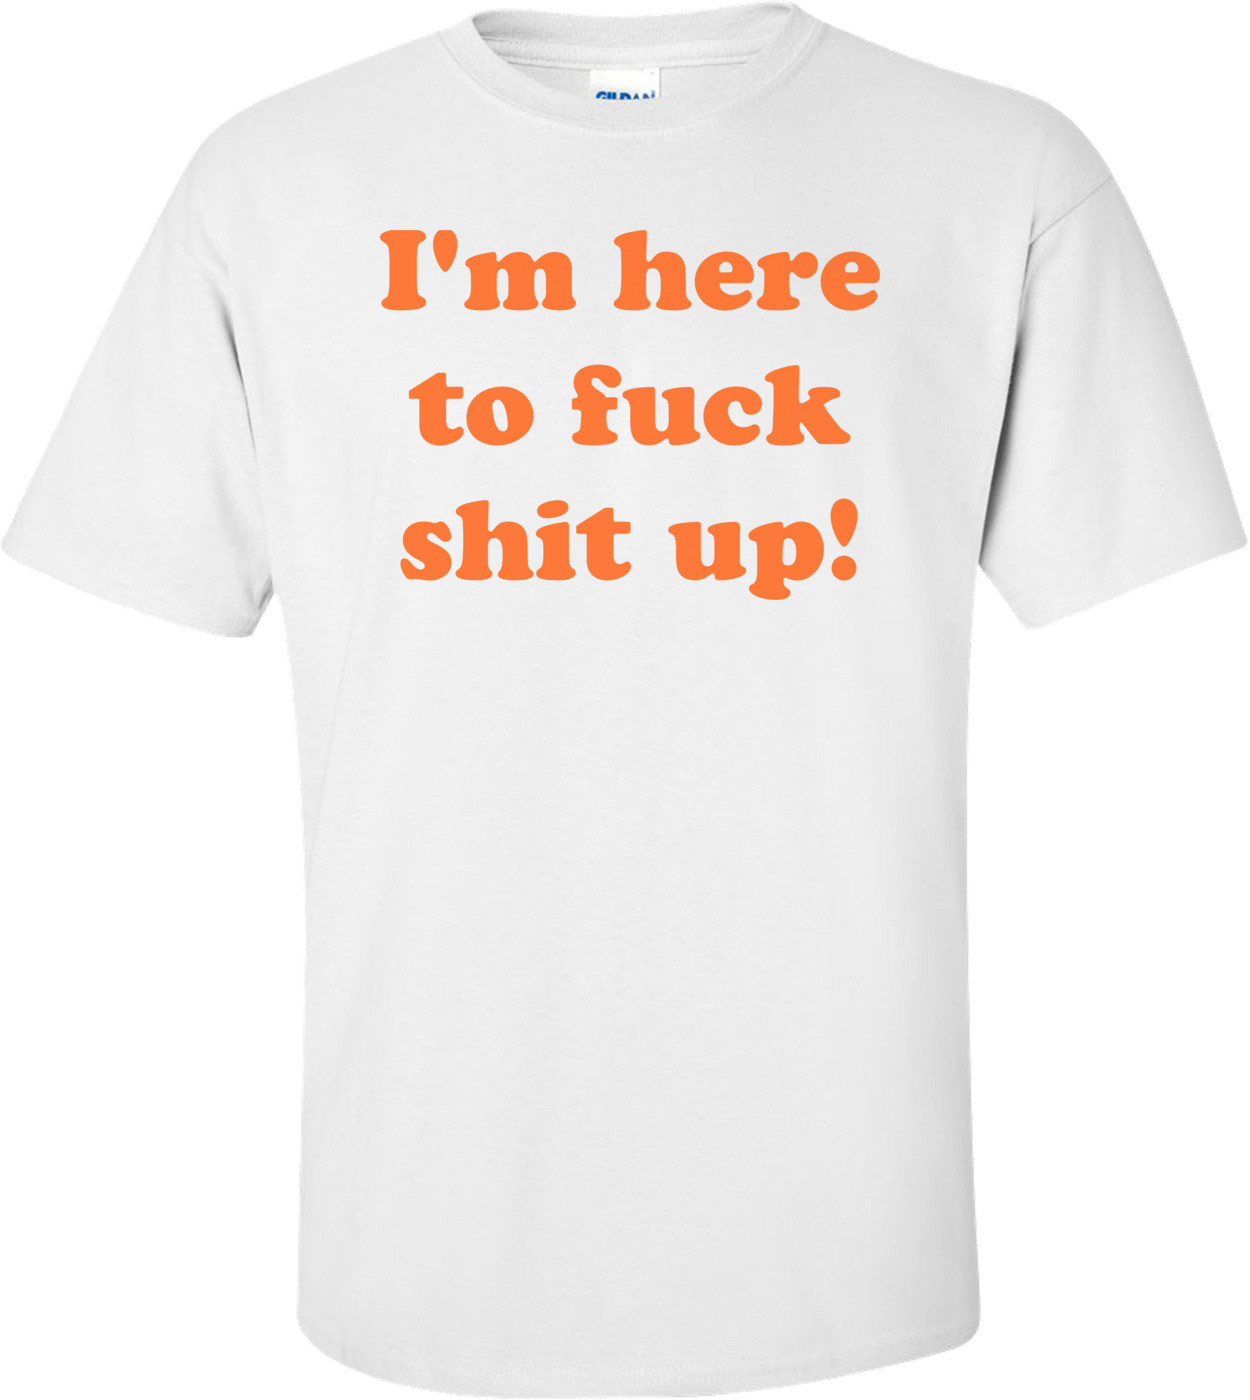 I'm here to fuck shit up! Shirt